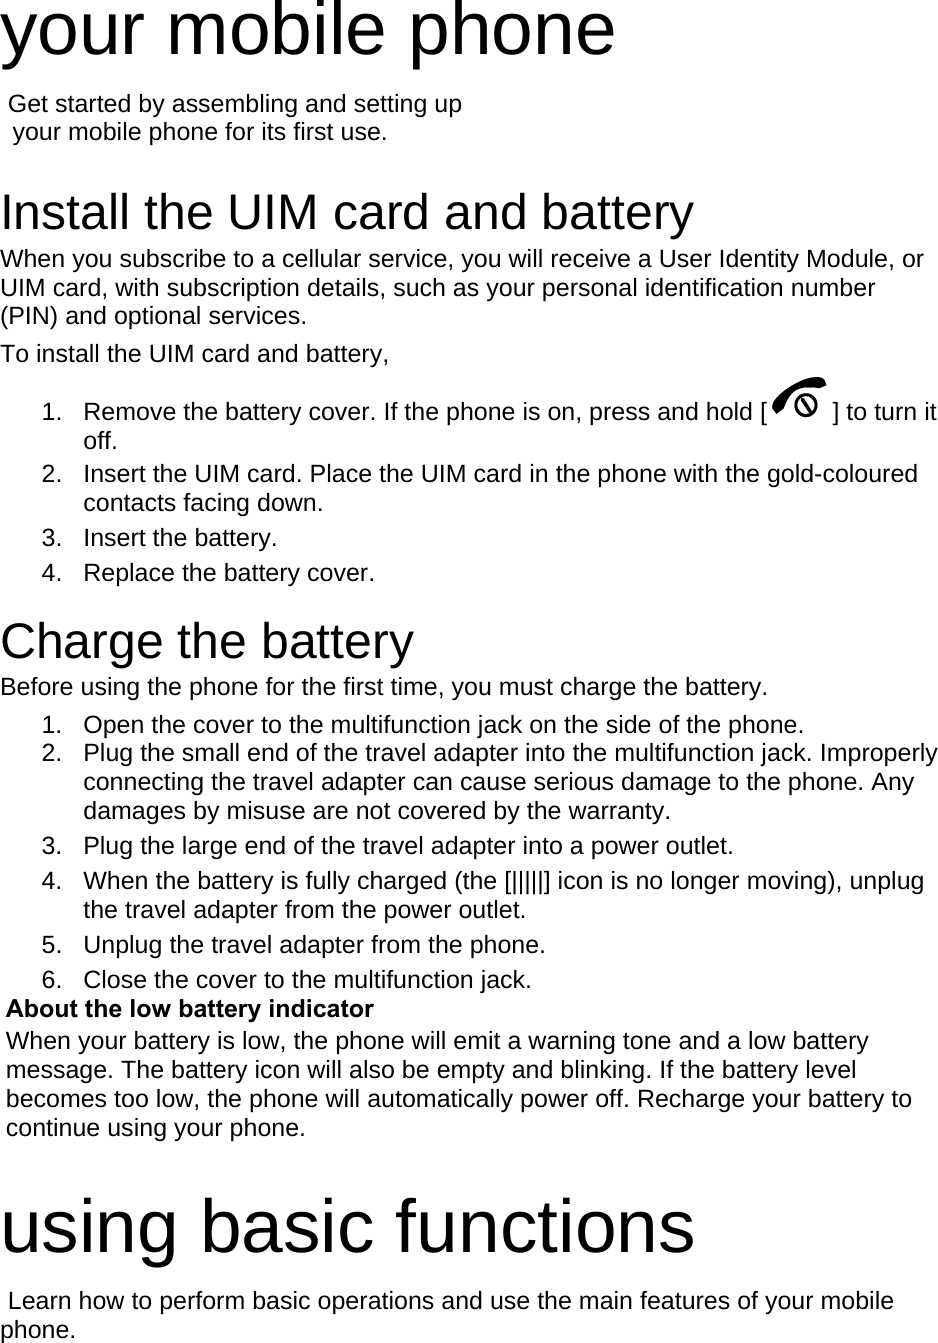 your mobile phone    Get started by assembling and setting up     your mobile phone for its first use.  Install the UIM card and battery When you subscribe to a cellular service, you will receive a User Identity Module, or UIM card, with subscription details, such as your personal identification number (PIN) and optional services. To install the UIM card and battery, 1.  Remove the battery cover. If the phone is on, press and hold [ ] to turn it off. 2.  Insert the UIM card. Place the UIM card in the phone with the gold-coloured contacts facing down. 3. Insert the battery. 4.  Replace the battery cover.  Charge the battery Before using the phone for the first time, you must charge the battery. 1.  Open the cover to the multifunction jack on the side of the phone. 2.  Plug the small end of the travel adapter into the multifunction jack. Improperly connecting the travel adapter can cause serious damage to the phone. Any damages by misuse are not covered by the warranty. 3.  Plug the large end of the travel adapter into a power outlet. 4.  When the battery is fully charged (the [|||||] icon is no longer moving), unplug the travel adapter from the power outlet. 5.  Unplug the travel adapter from the phone. 6.  Close the cover to the multifunction jack. About the low battery indicator When your battery is low, the phone will emit a warning tone and a low battery message. The battery icon will also be empty and blinking. If the battery level becomes too low, the phone will automatically power off. Recharge your battery to continue using your phone.  using basic functions  Learn how to perform basic operations and use the main features of your mobile phone.   